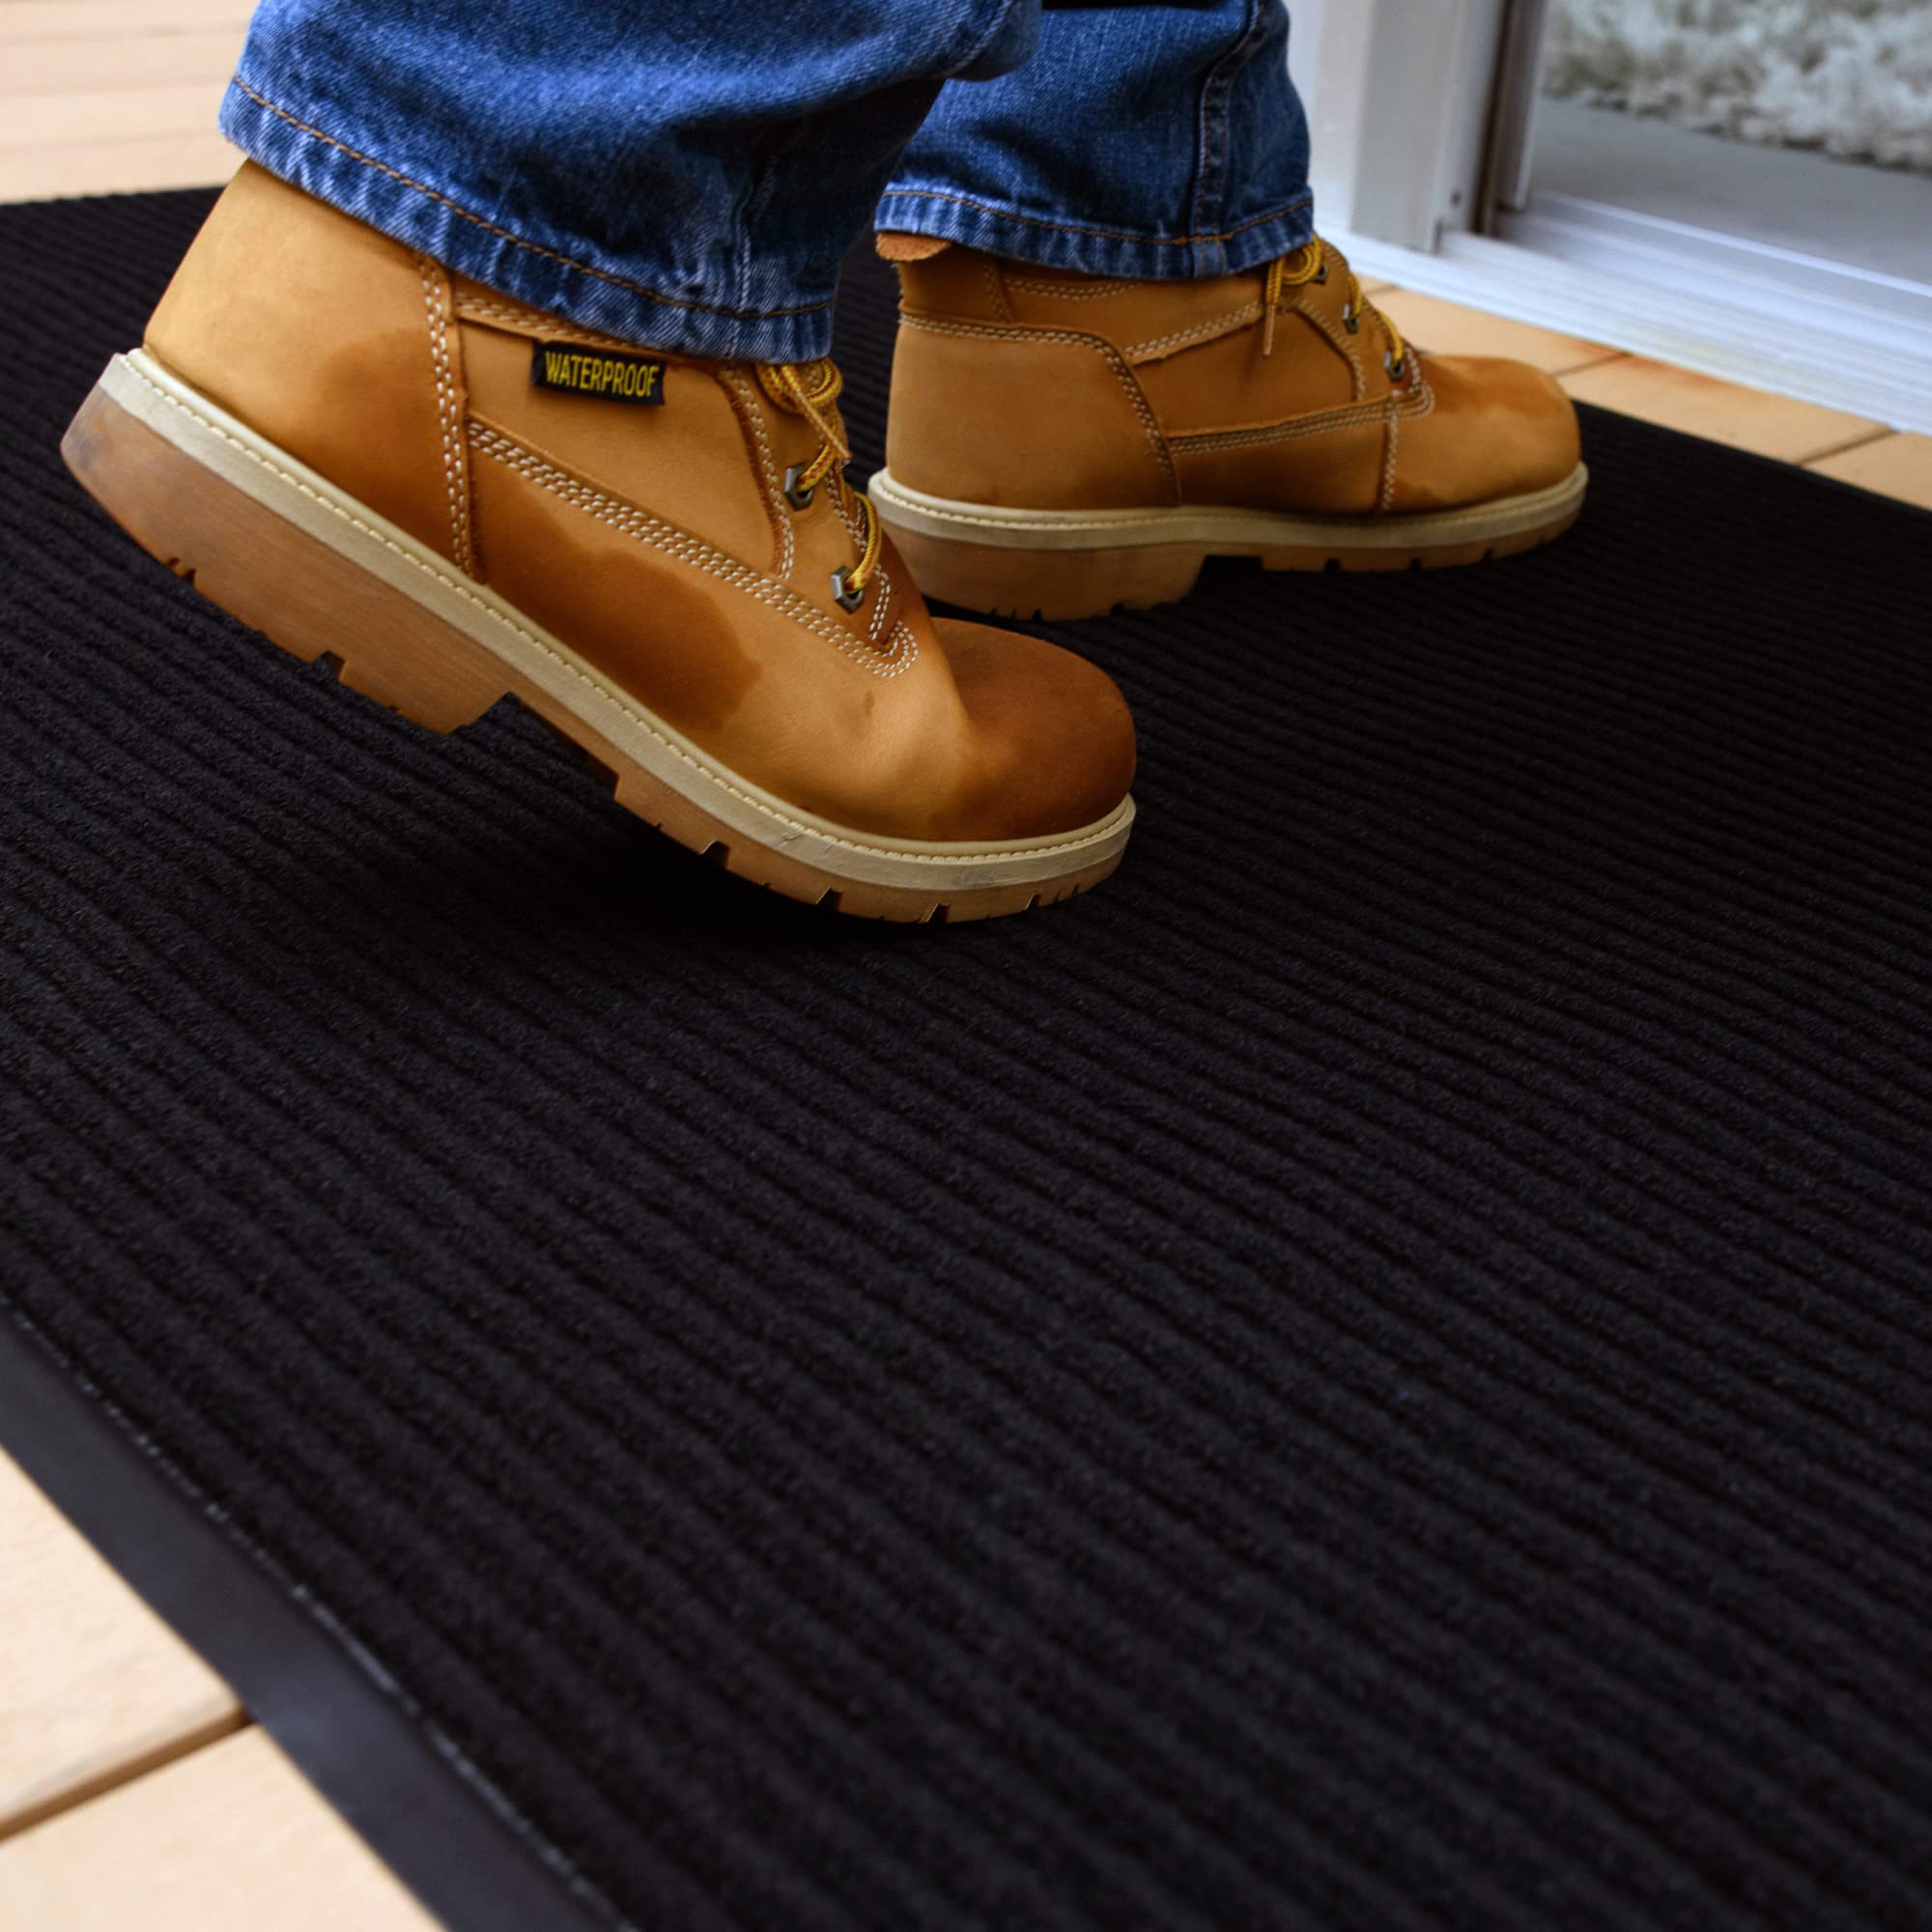 UNIMAT 4x6 (48"x 72") Dual Ribbed Outdoor-Indoor Doormat with Waterproof Black Rubber Backing - Stylish Welcome Mat, Perfect for Home, Office, and Kitchen Entrances